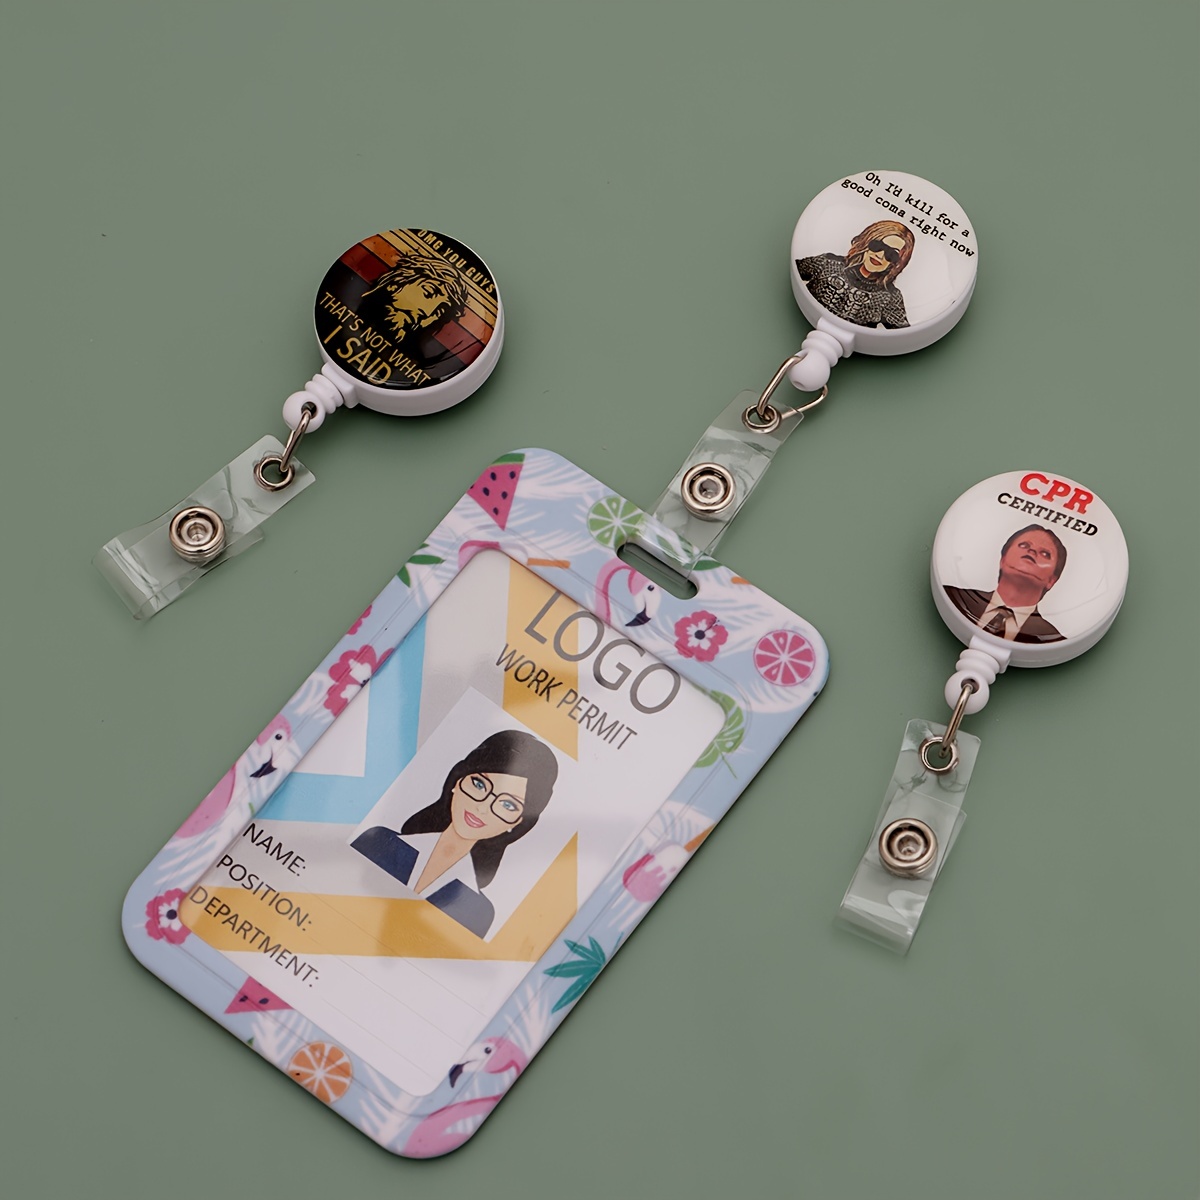 5pcs Cute & Funny Badge Reels - Perfect for Office Men & Women -  Retractable Badge Holders & Lanyards for ID Badges